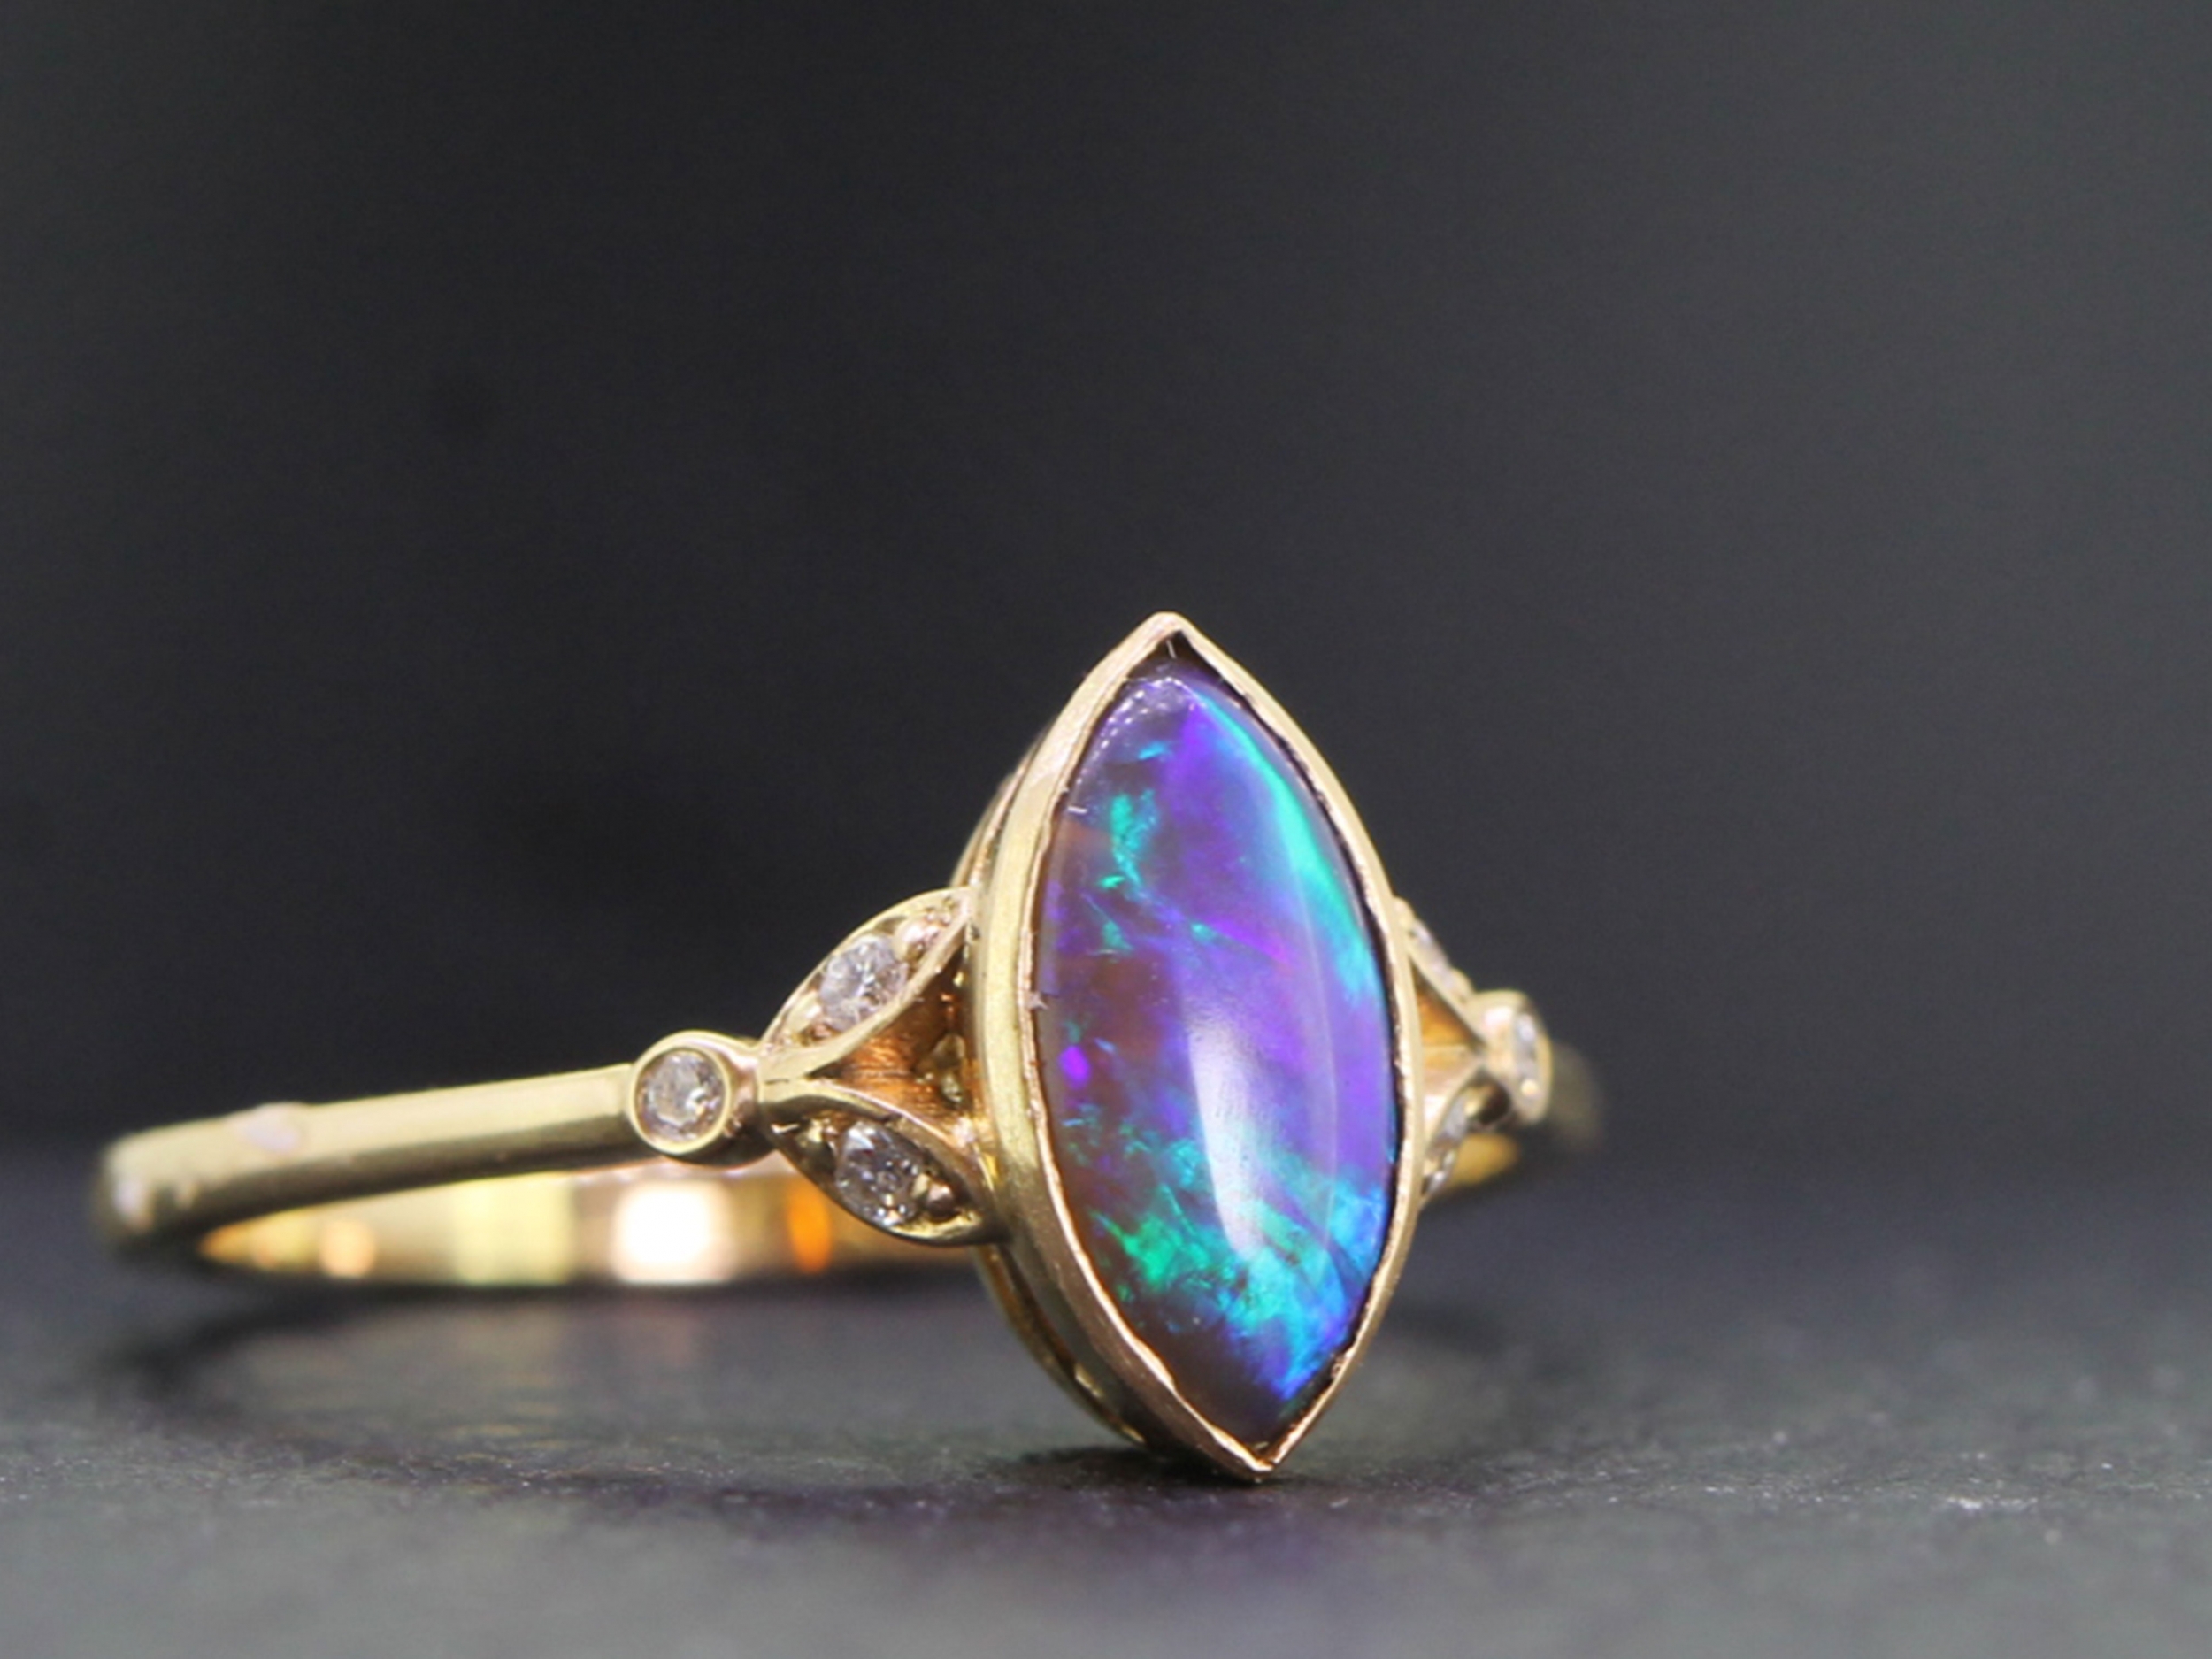 Stunning solid black opal and diamond 14 carat ring